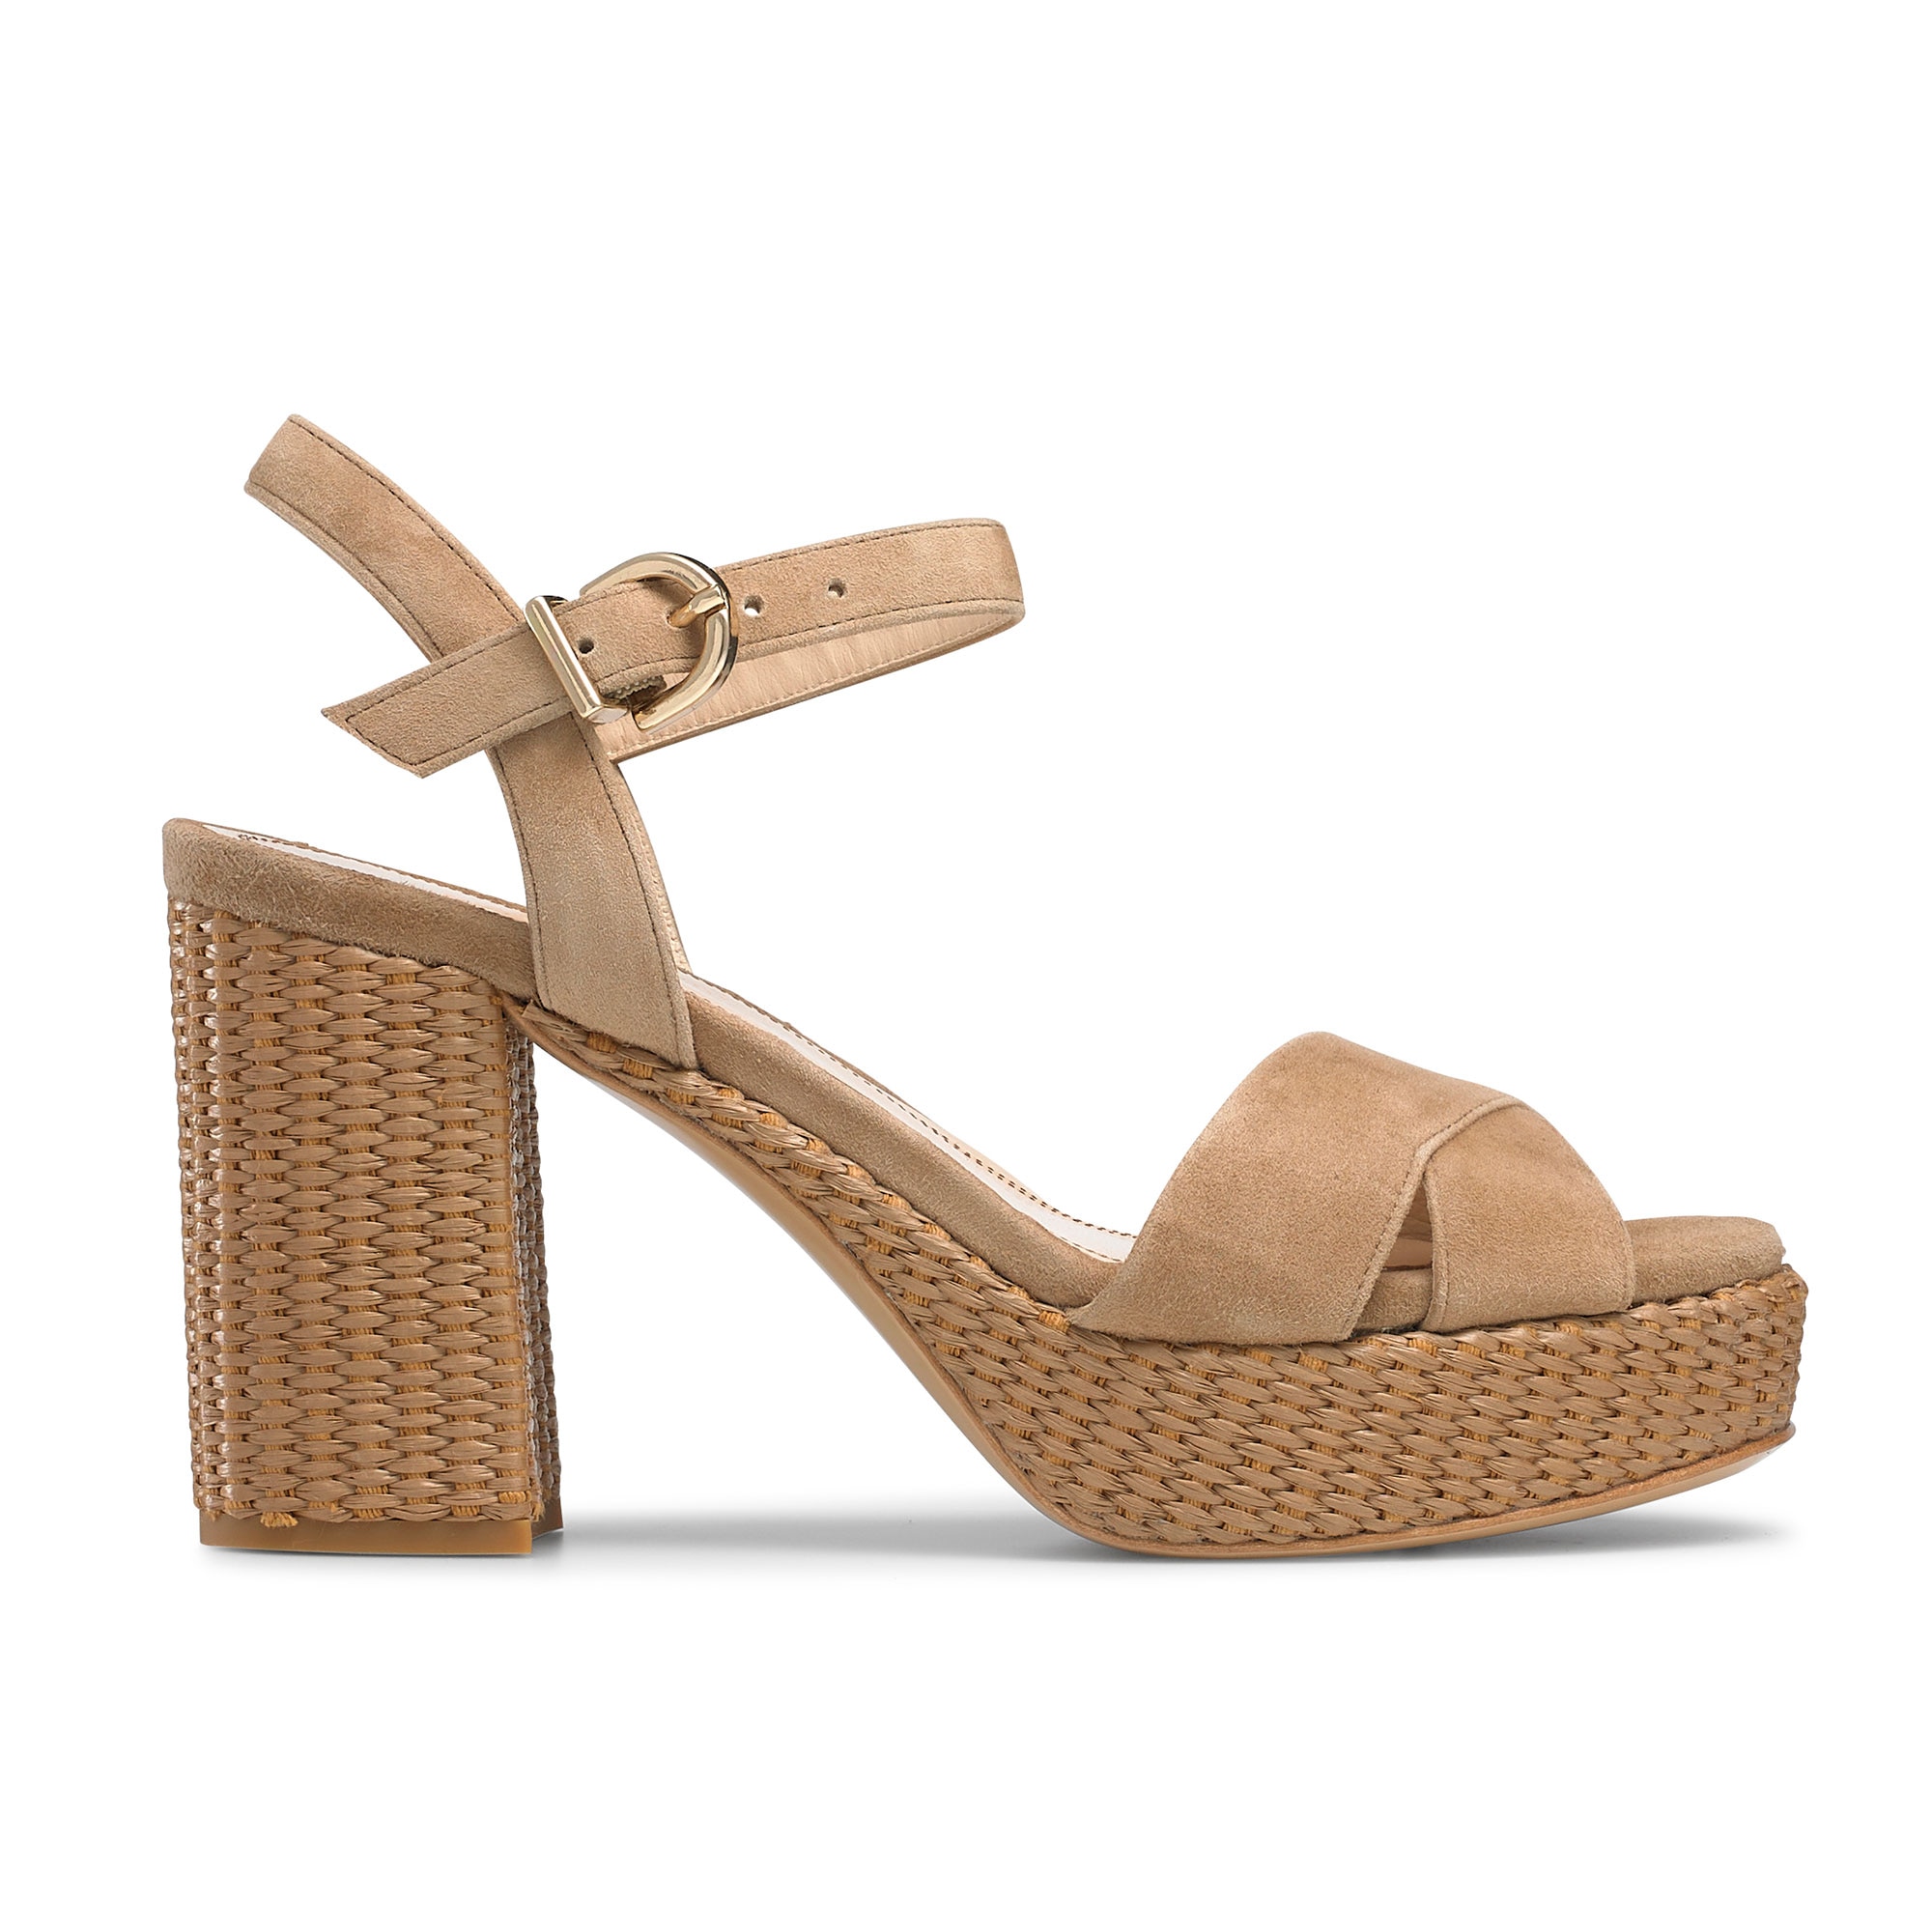 Russell & Bromley Women's Comfortable Tan Brown Suede Woven Topform Classic Platform Sandals, Size: UK 6.5